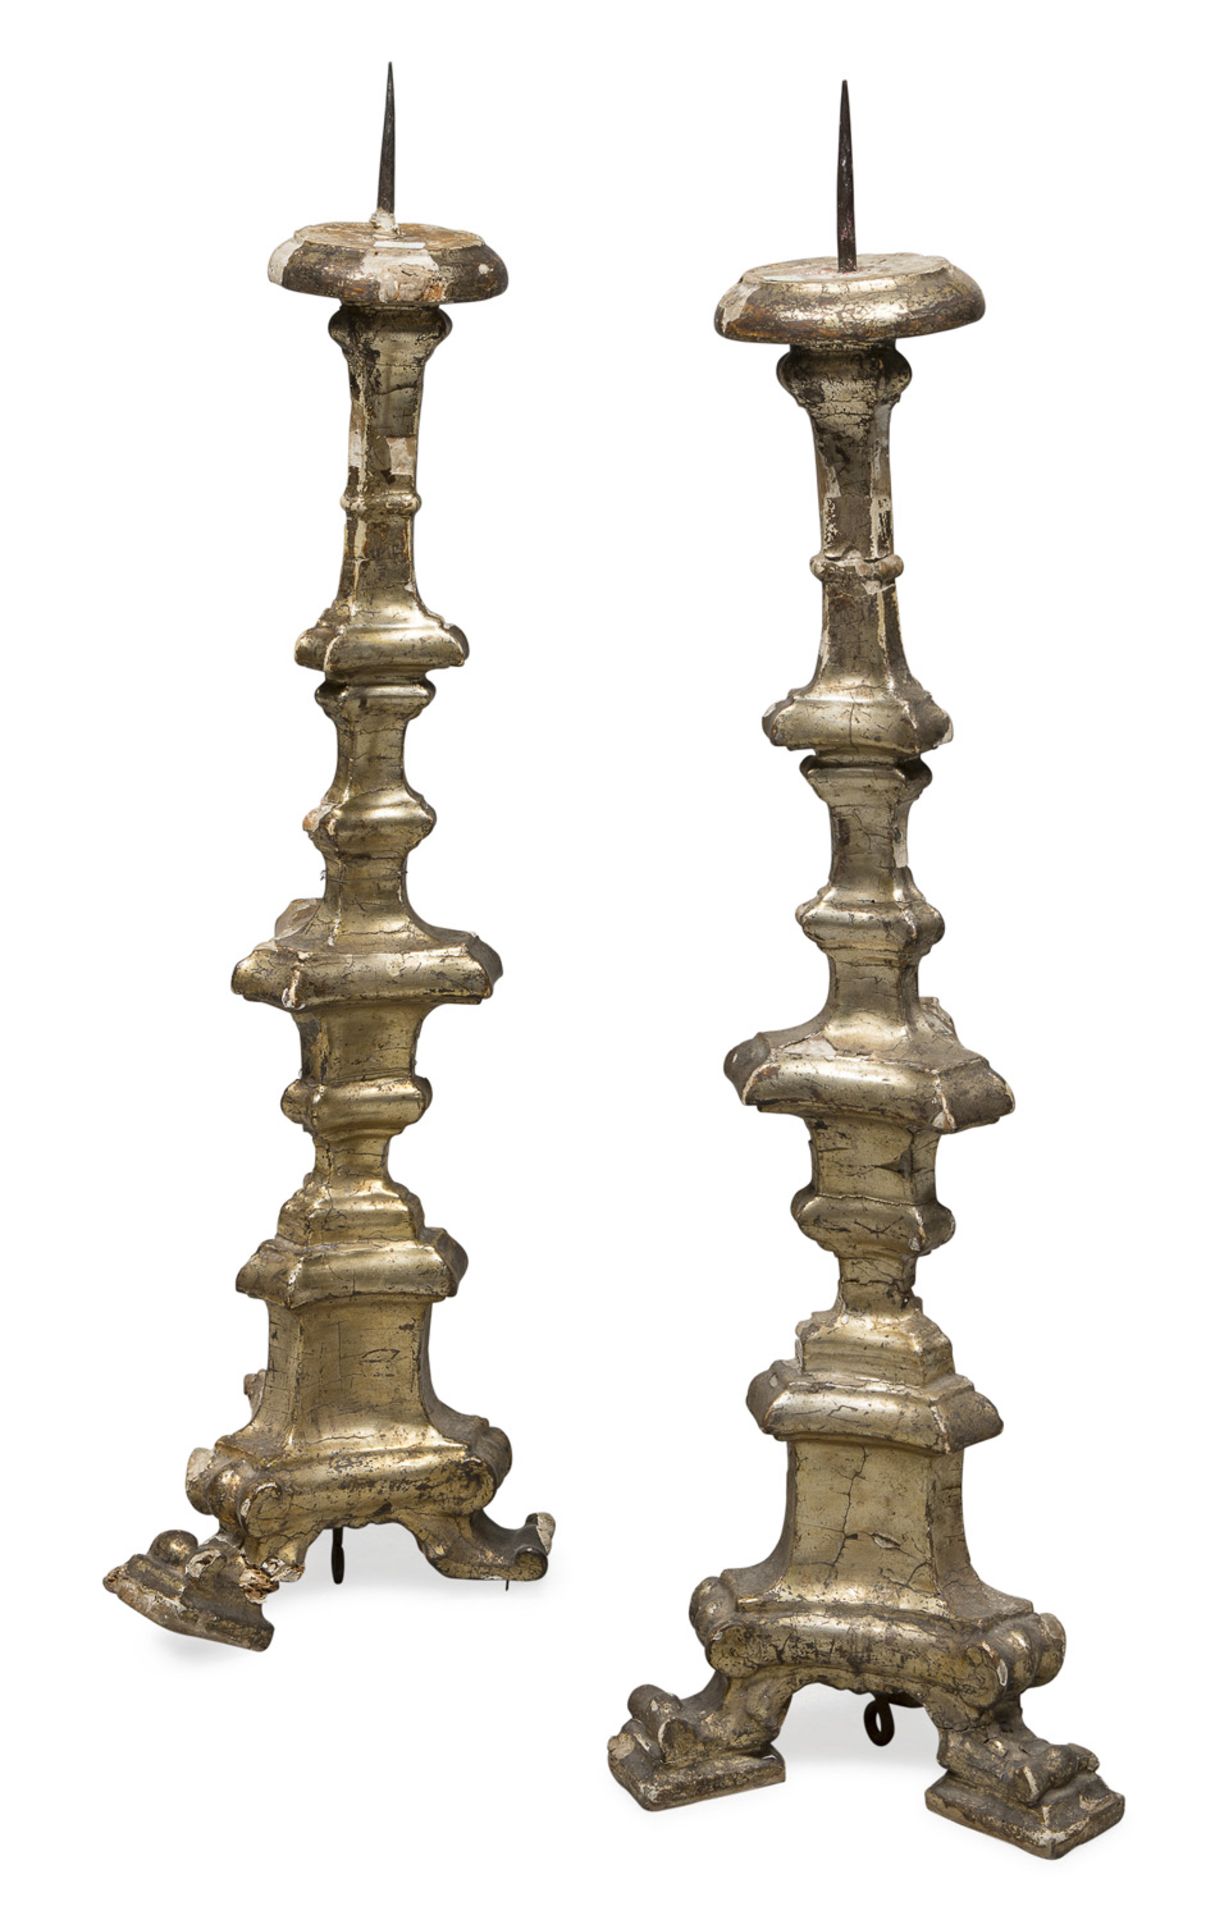 PAIR OF GILTWOOD CANDLESTICKS ROME 18th CENTURY